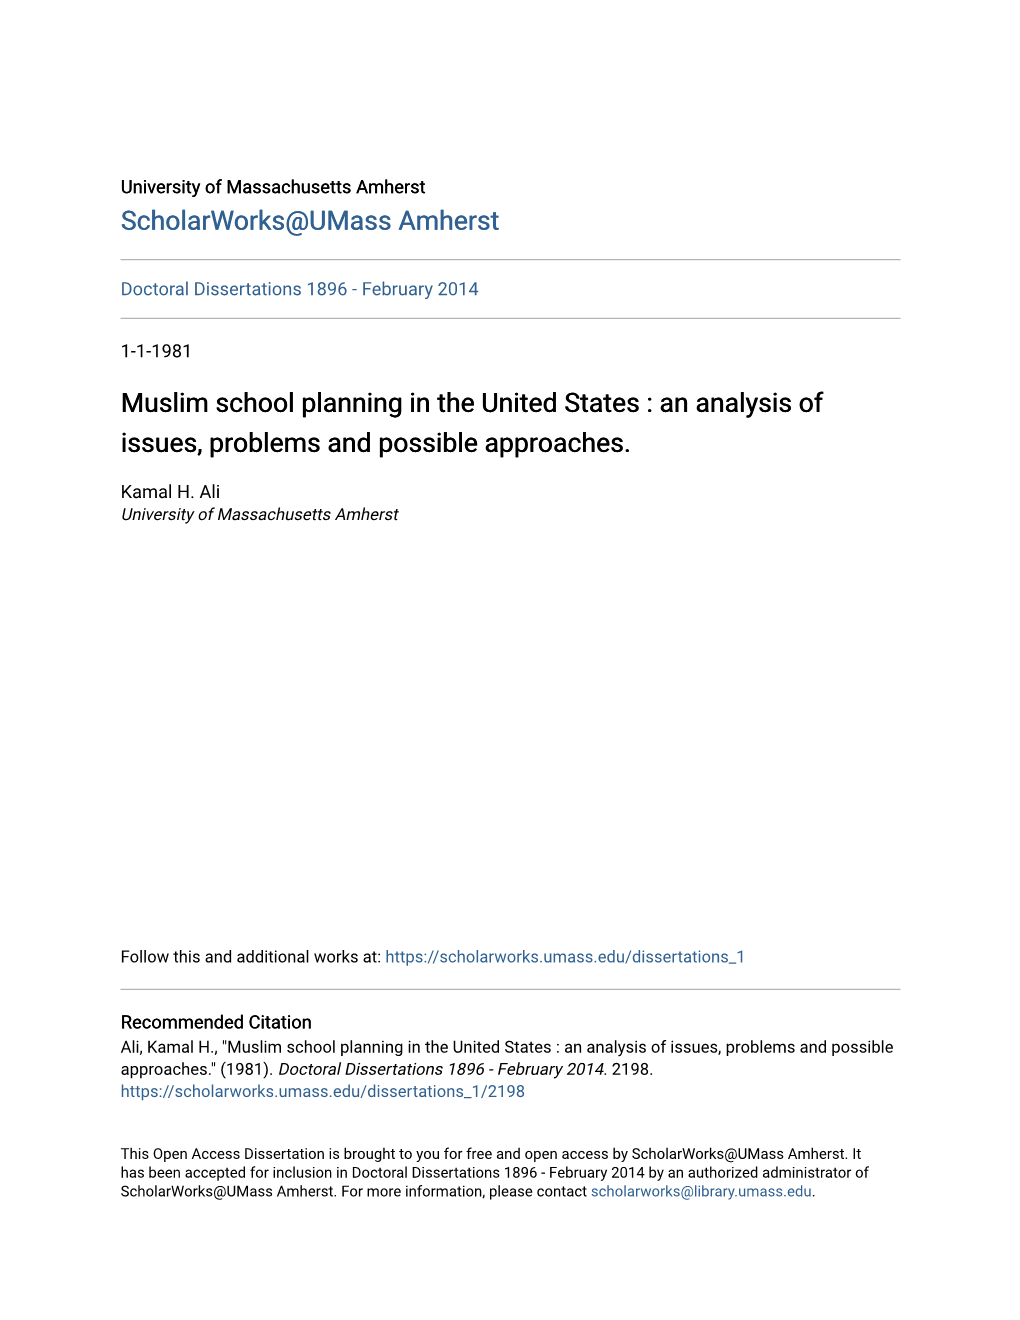 Muslim School Planning in the United States : an Analysis of Issues, Problems and Possible Approaches